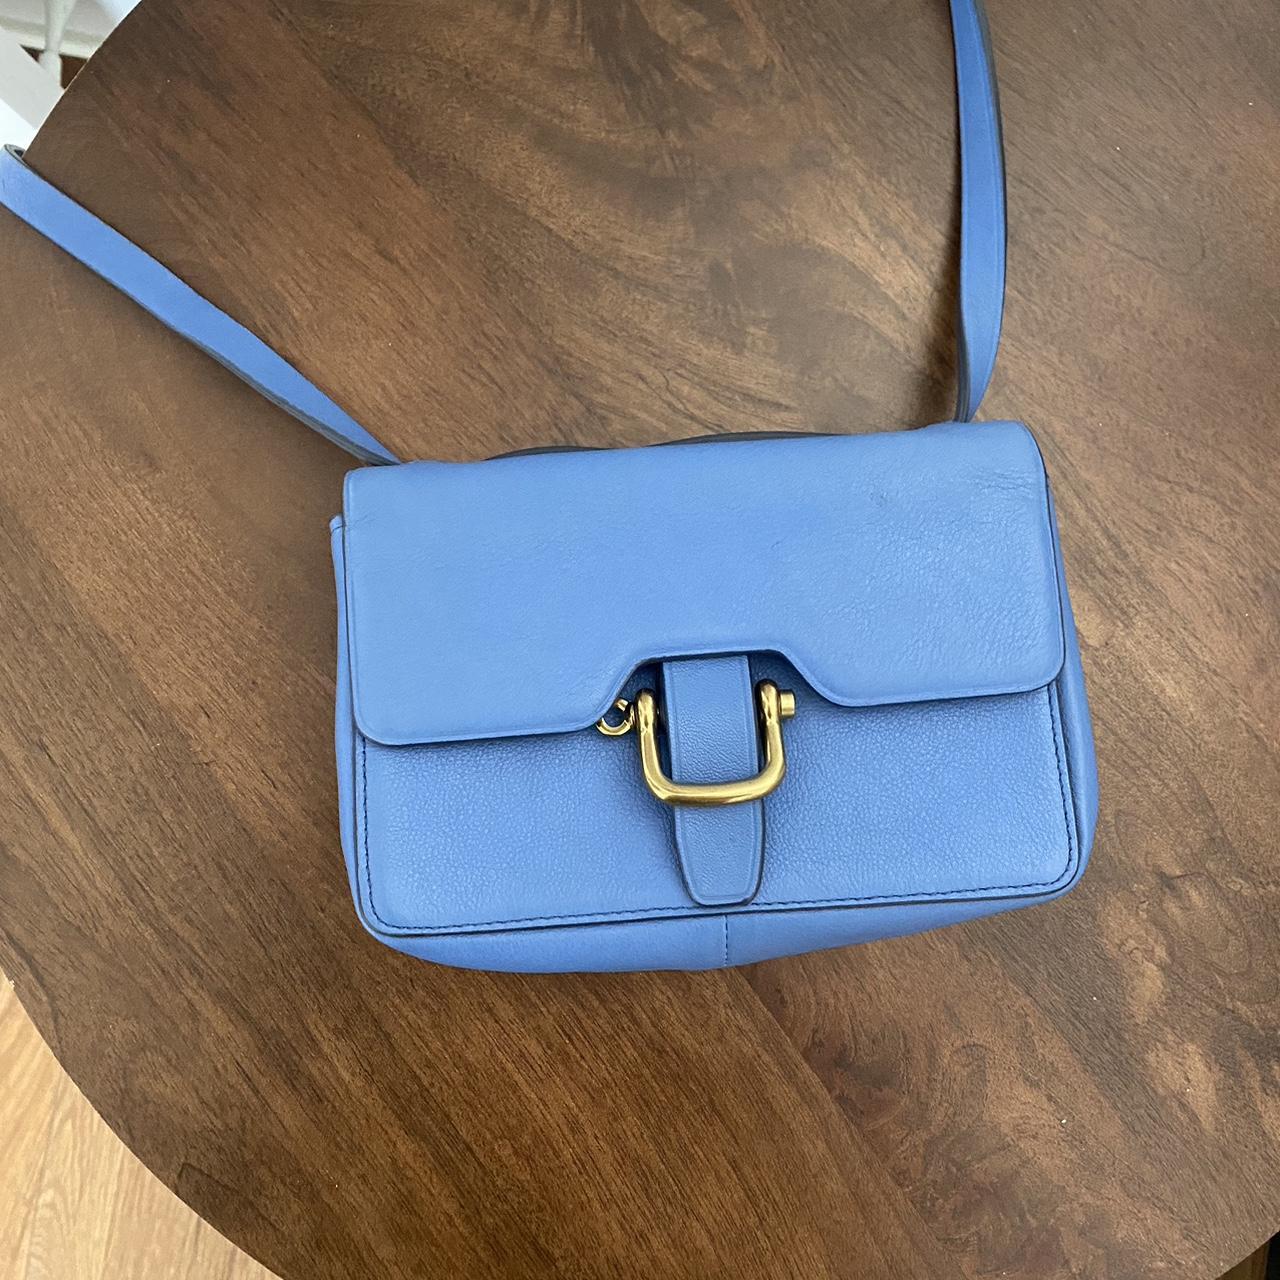 THE J Marc Shoulder Bag in Ice Blue. So gorgeous 💙 #GapLuxury  #THEMarcJacobs #MarcJacobs | Instagram